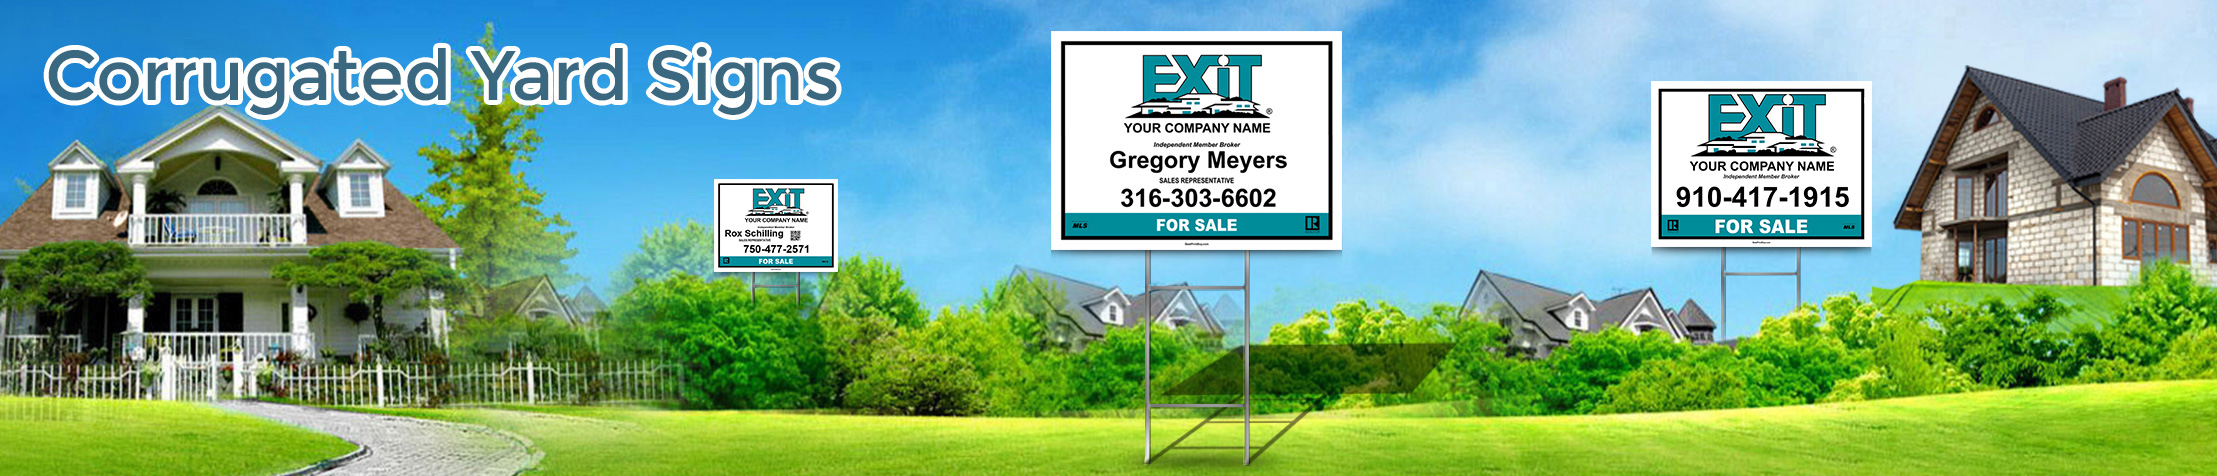 Exit Realty Corrugated Yard Signs - Exit Realty approved vendor real estate signs | BestPrintBuy.com